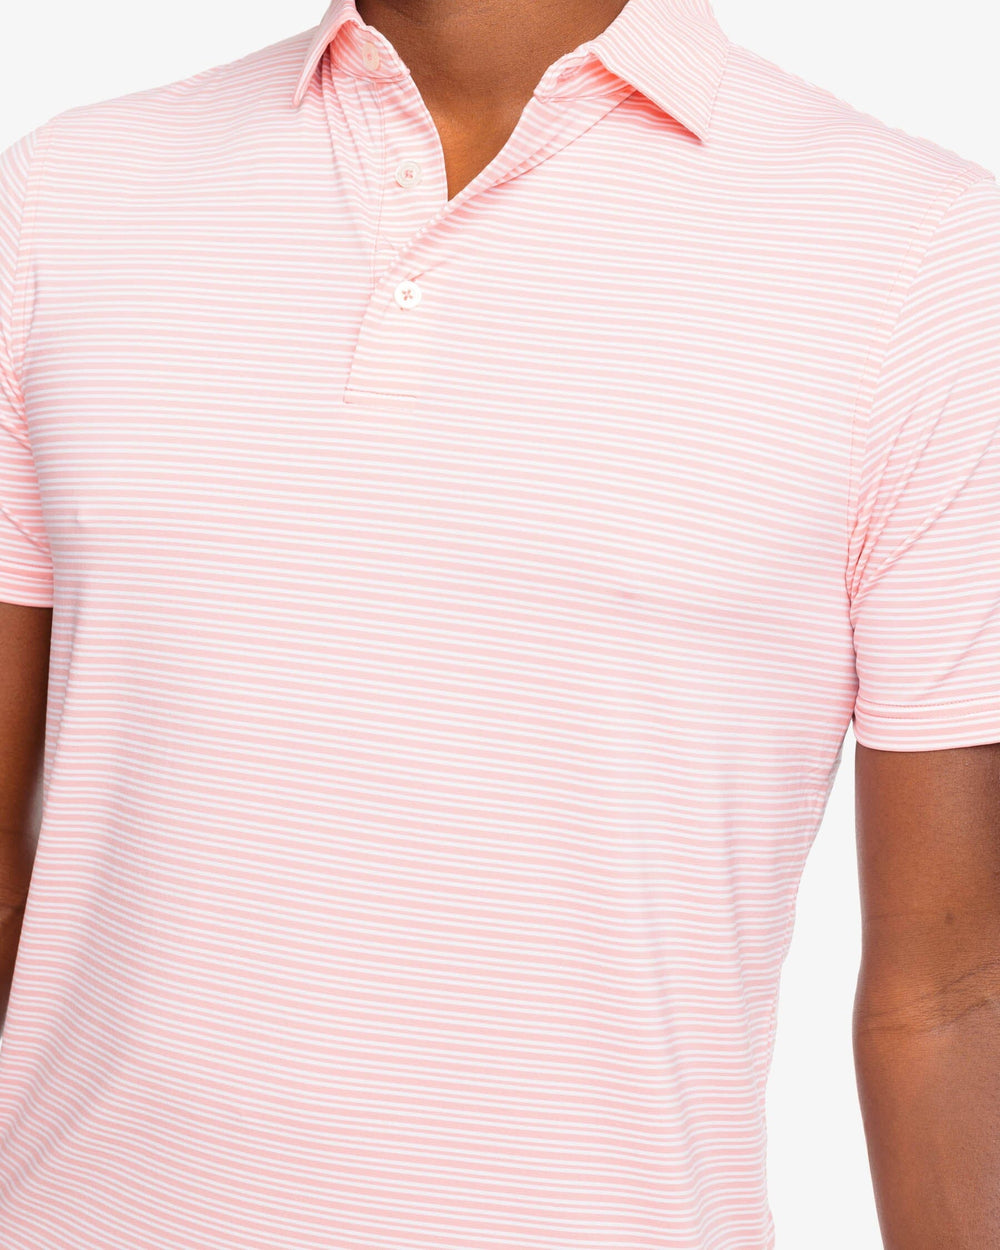 The detail view of the Southern Tide brrr-eeze Millwood Stripe Performance Polo Shirt by Southern Tide - Flamingo Pink